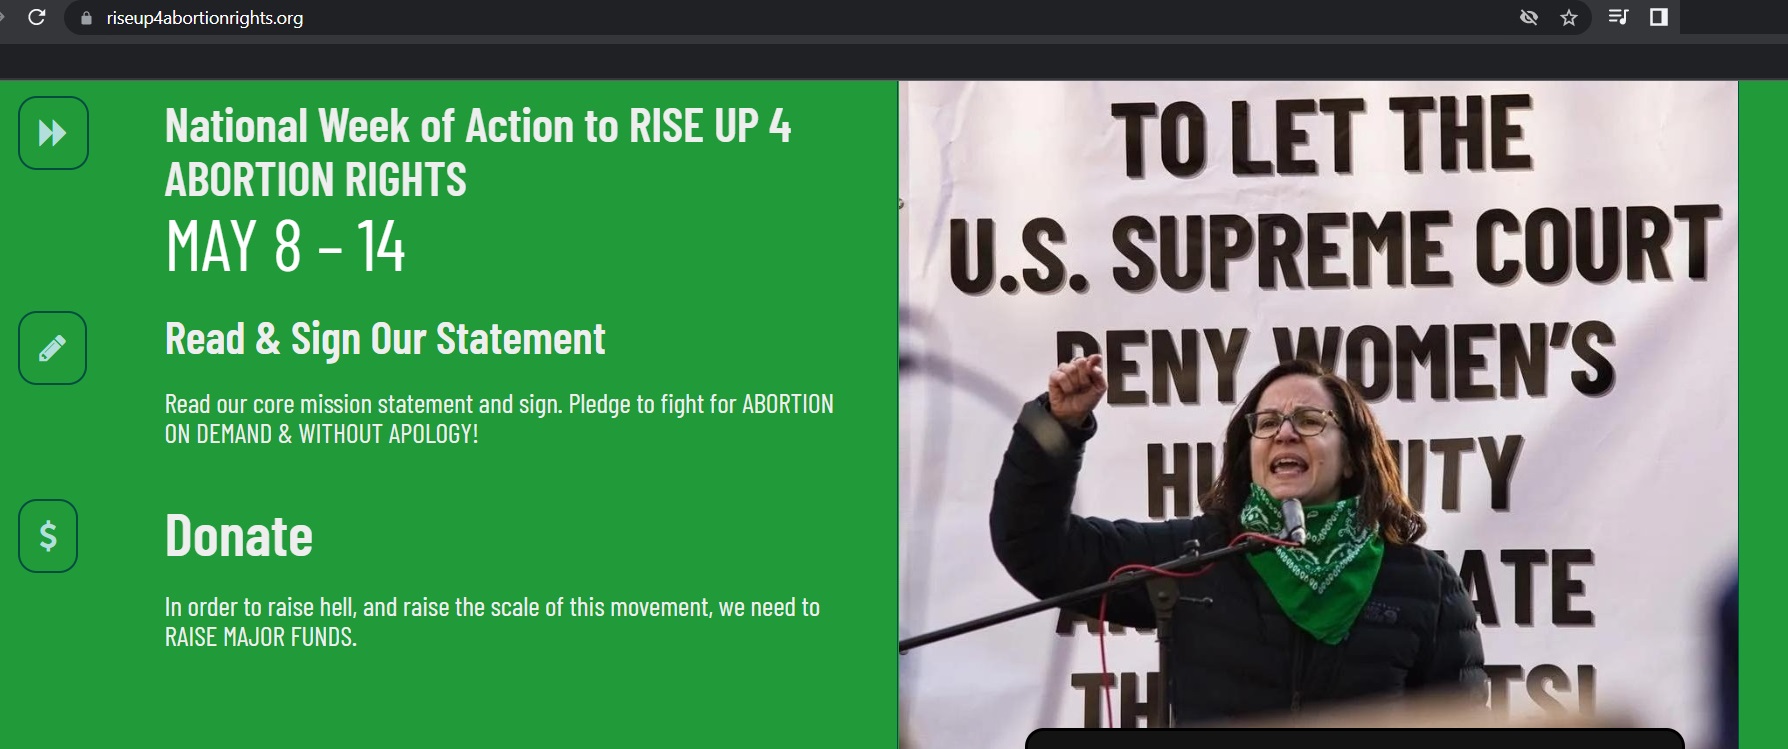 Image: Rise Up for Abortion Rights features abortion extremist Sunsara Taylor